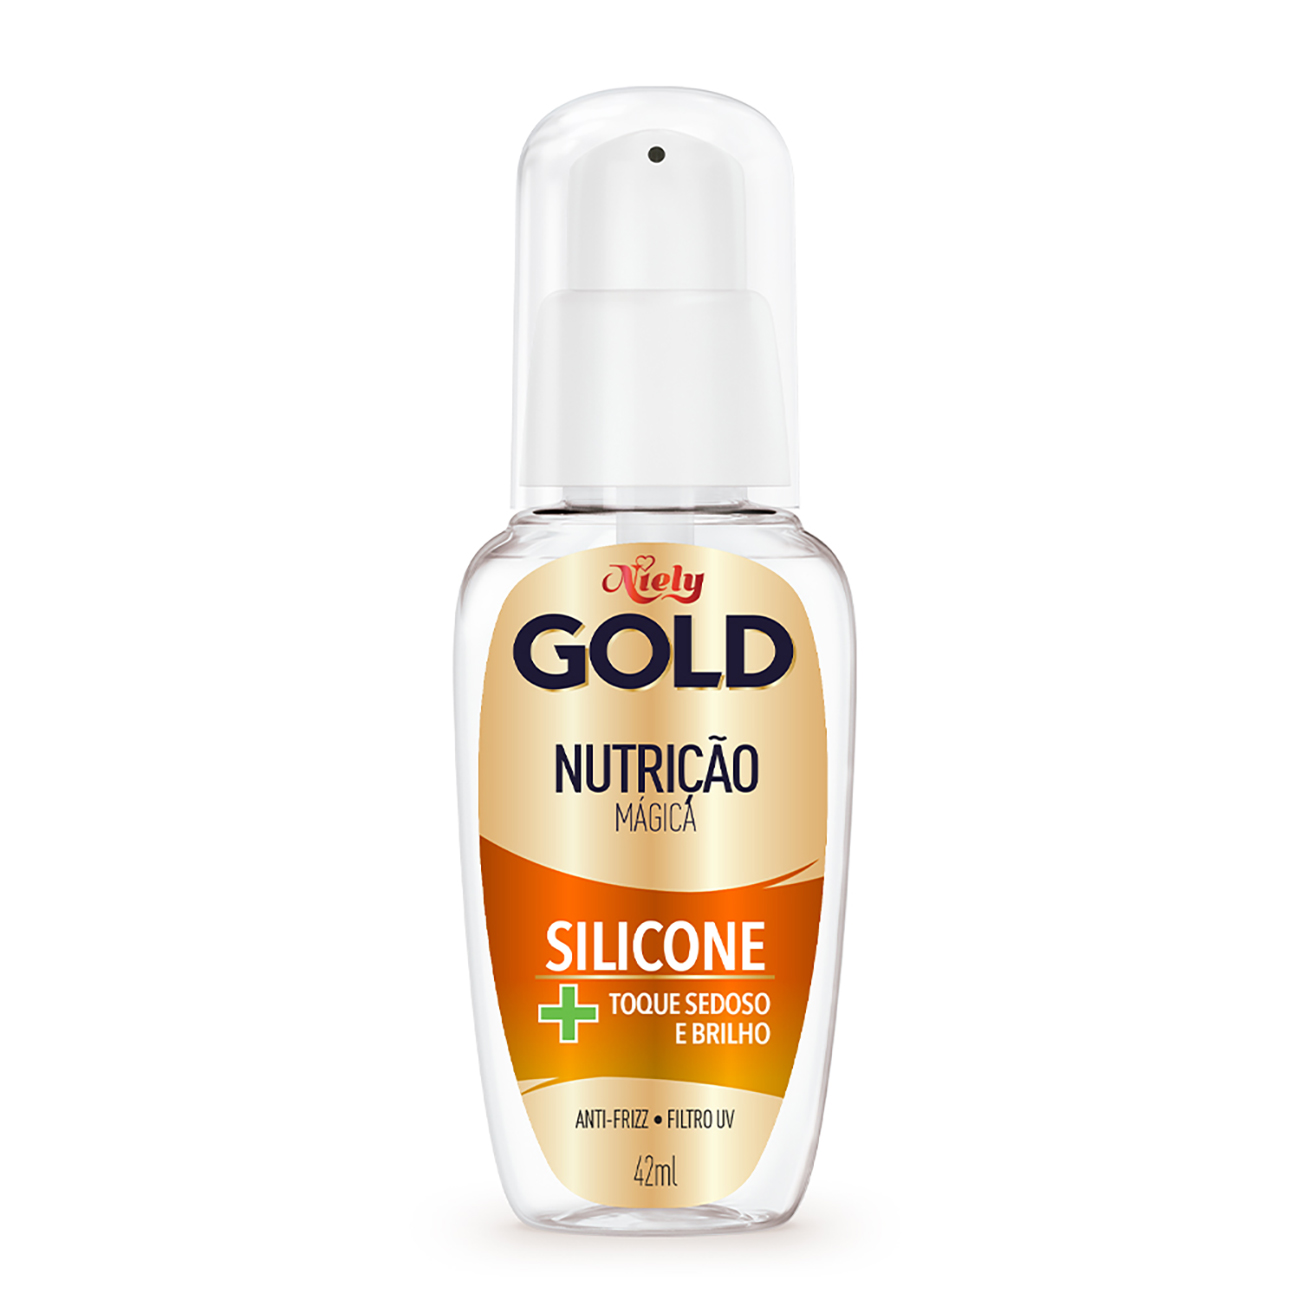 Silicone Niely Gold Nutrio Mgica 42mL